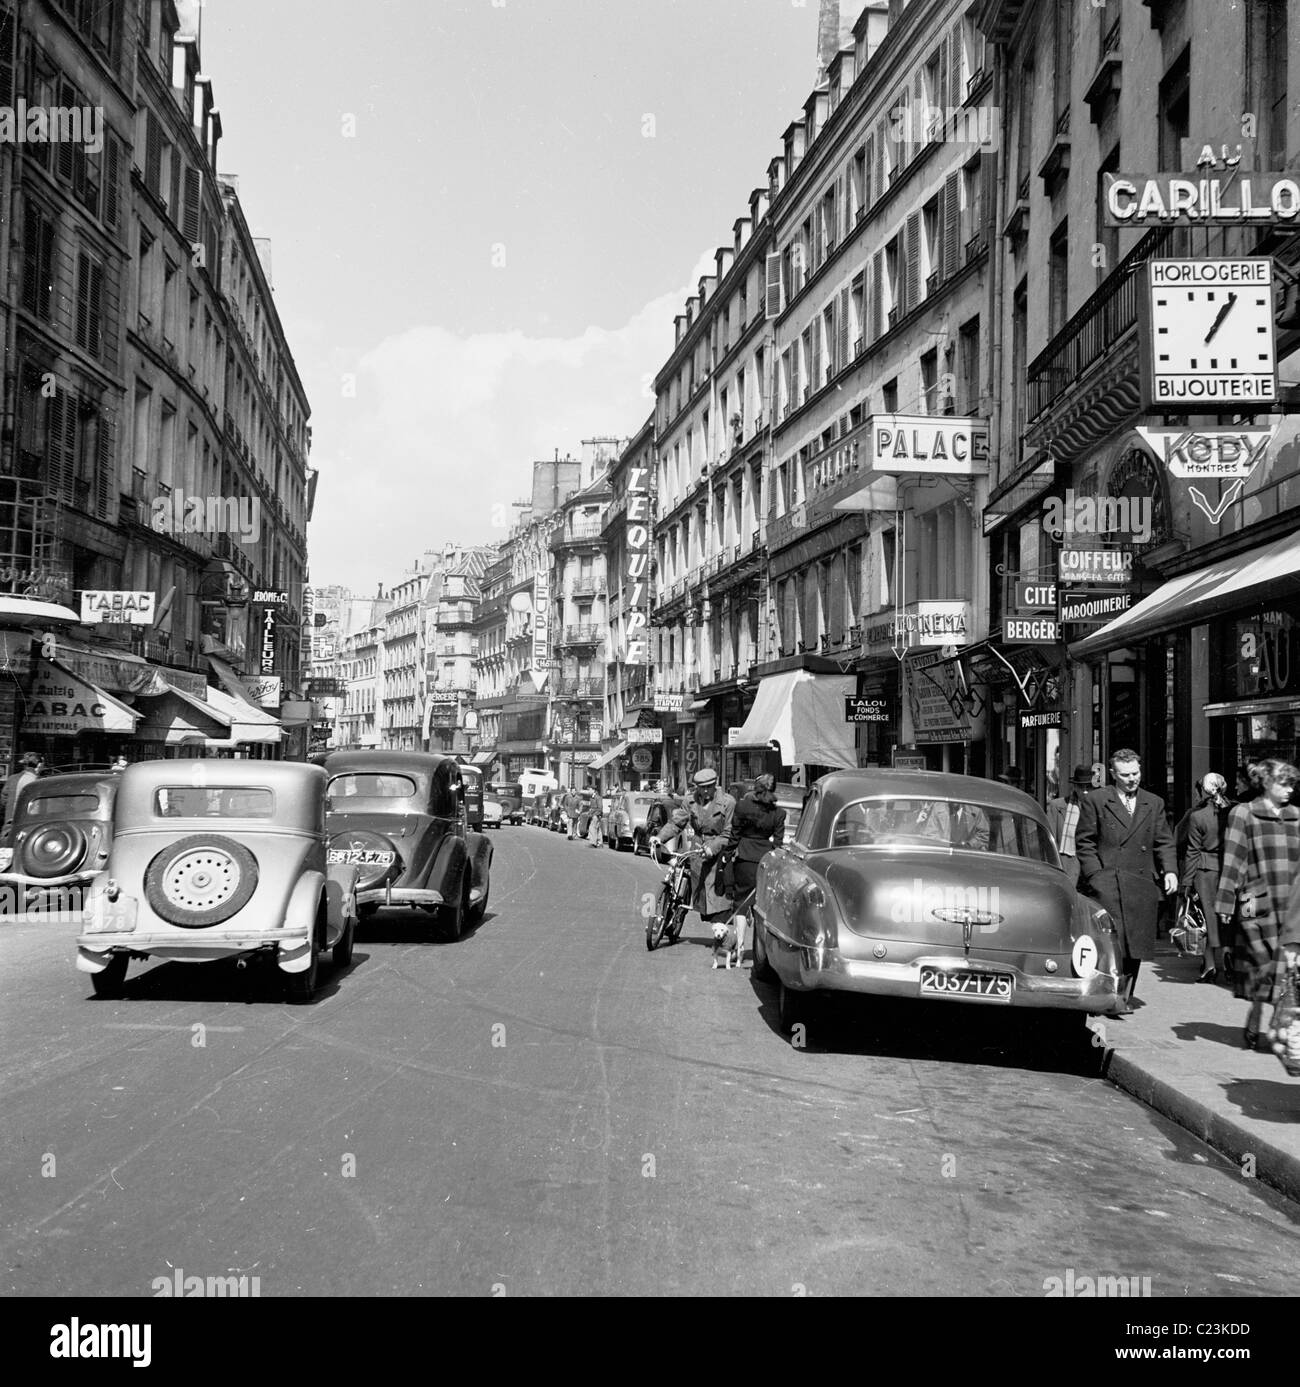 Paris, France, picture from the 1950s, looking down the Rue du Faubourg, Montmartre, showing parisians and motorcars of the era. Stock Photo